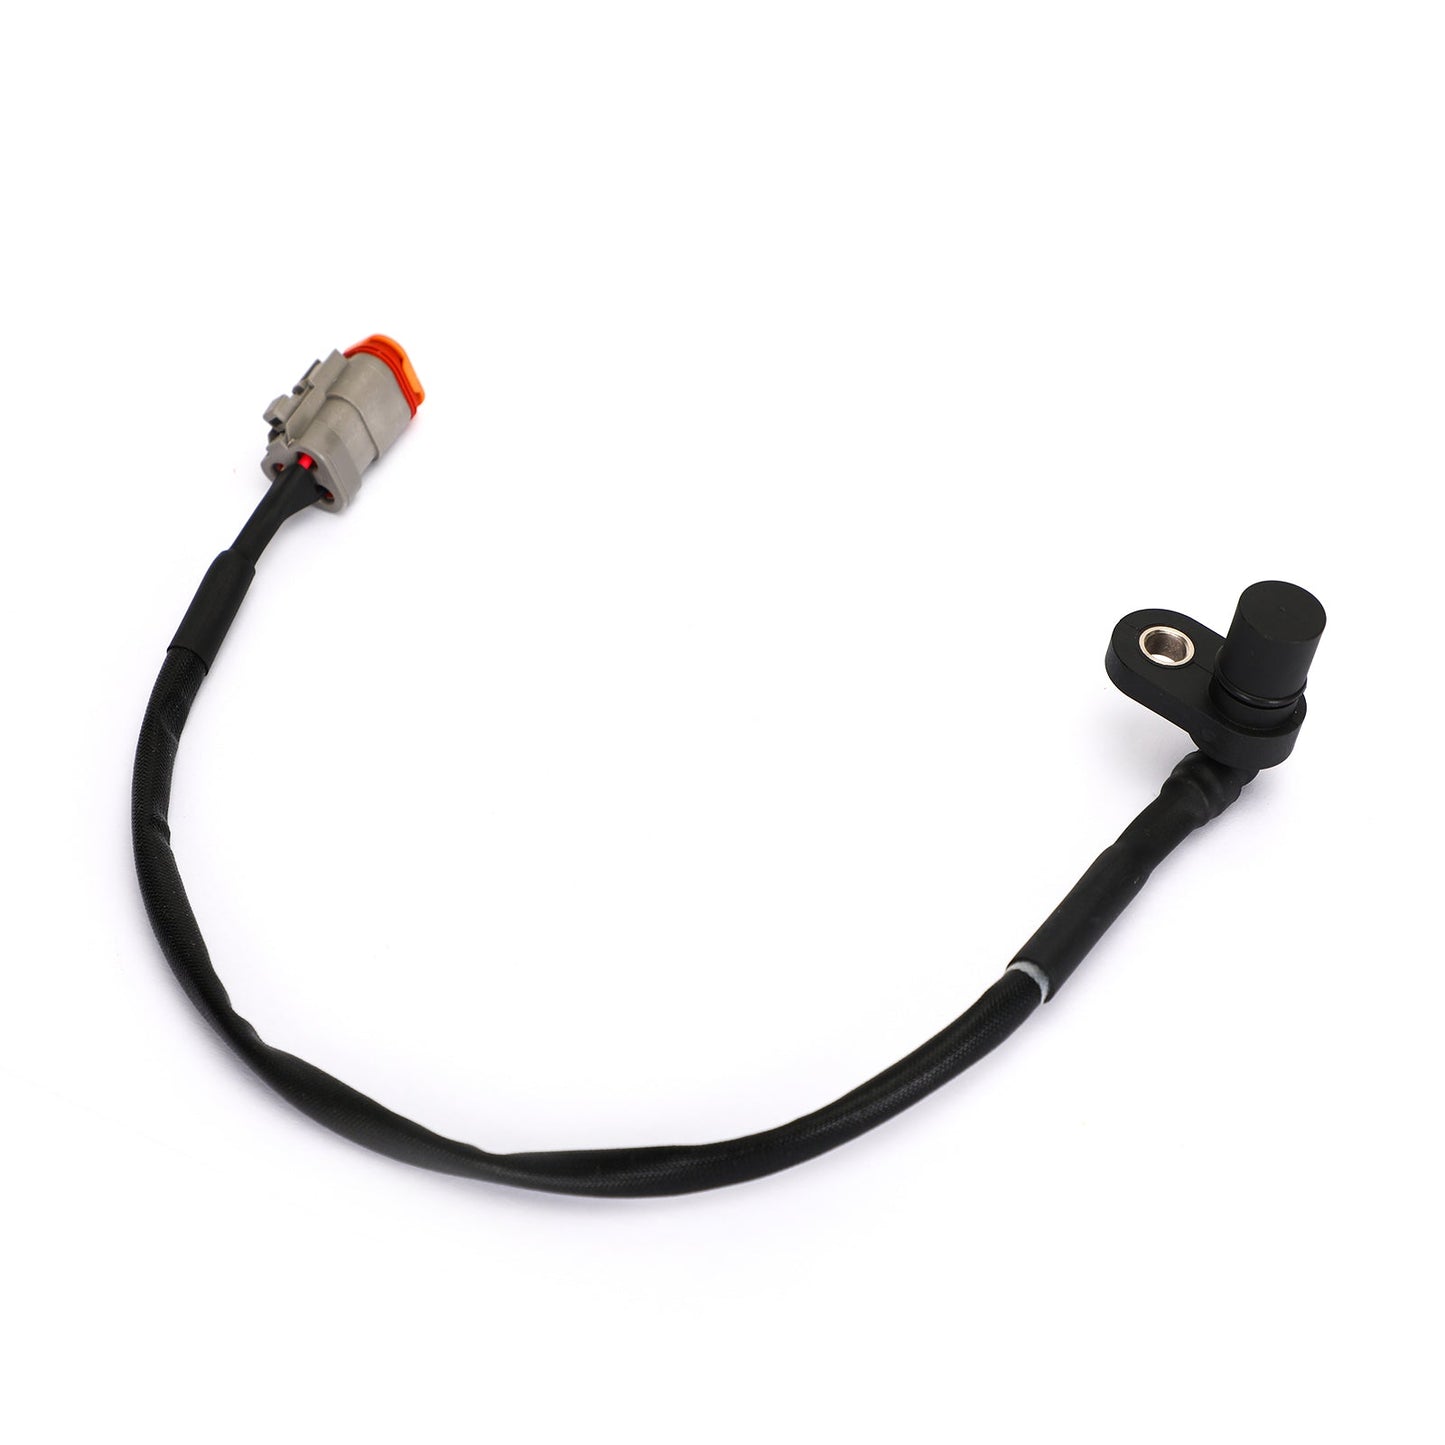 Speed Sensor fit for Can Am 715900314 420265621 420265625 420265626 420265629